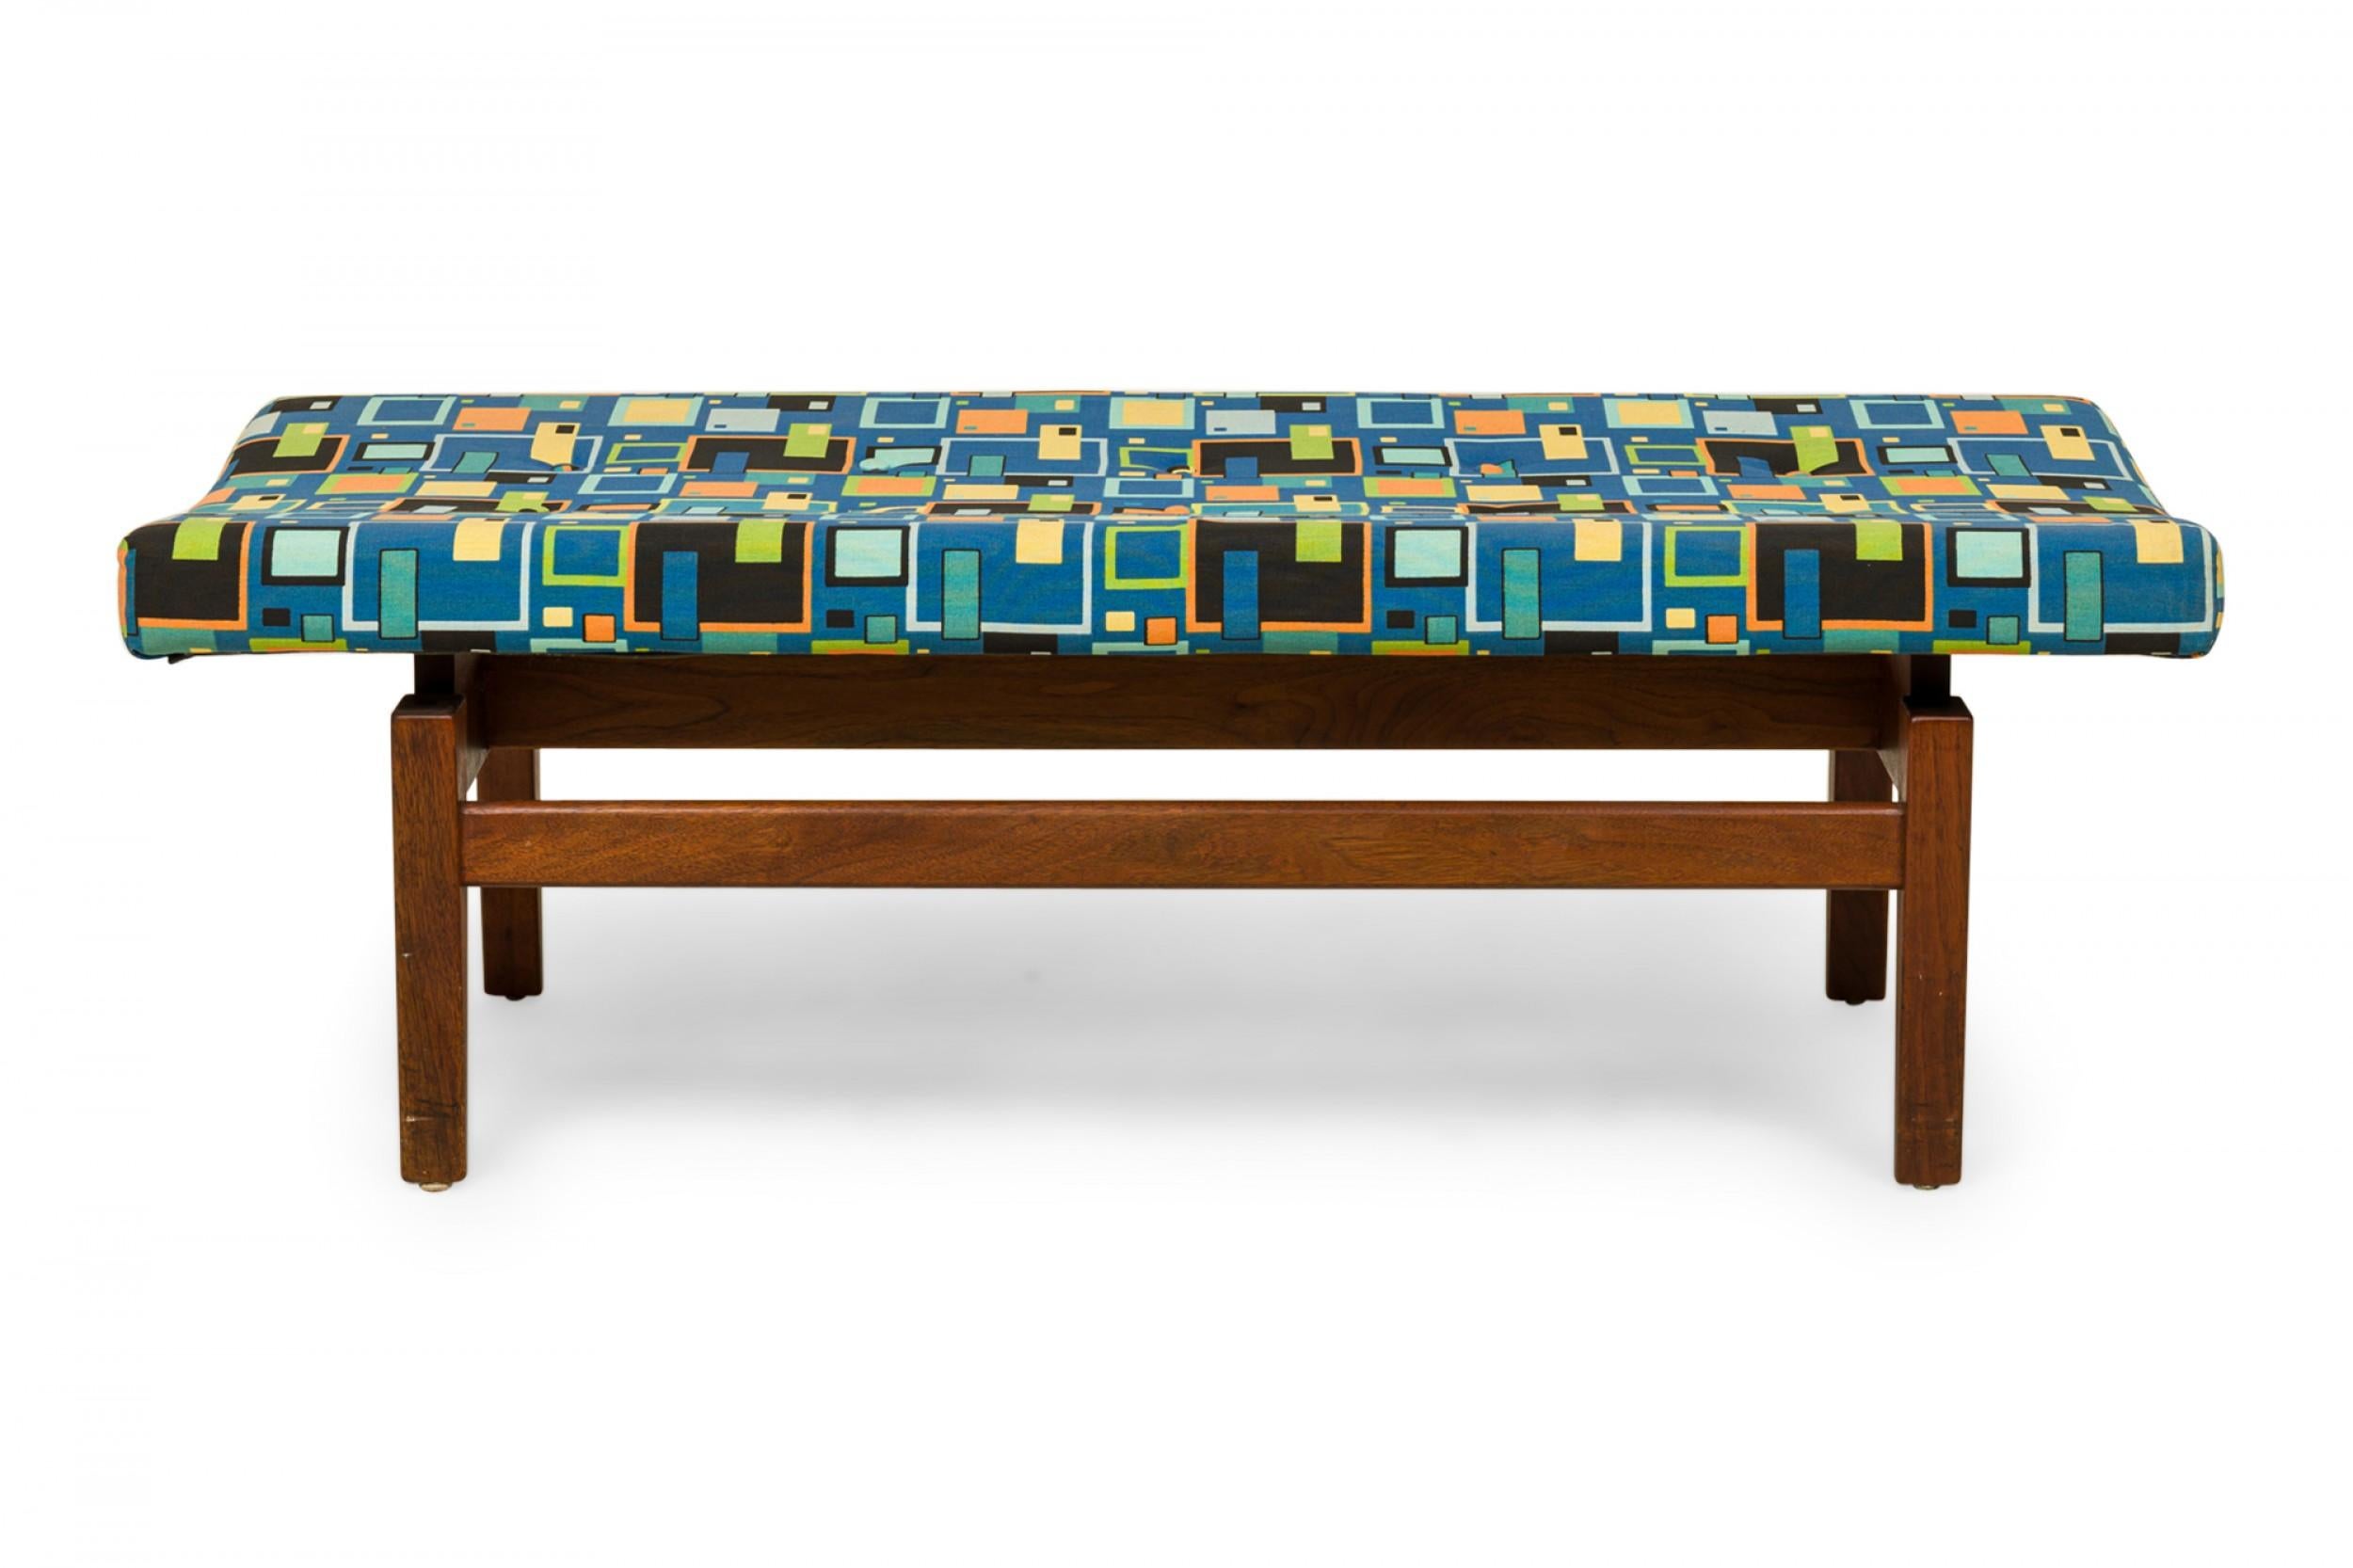 Danish Mid-Century rectangular floating bench with a geometrically patterned blue, green, and orange fabric upholstered seat resting on a wooden floating frame base. (JENS RISOM).
 